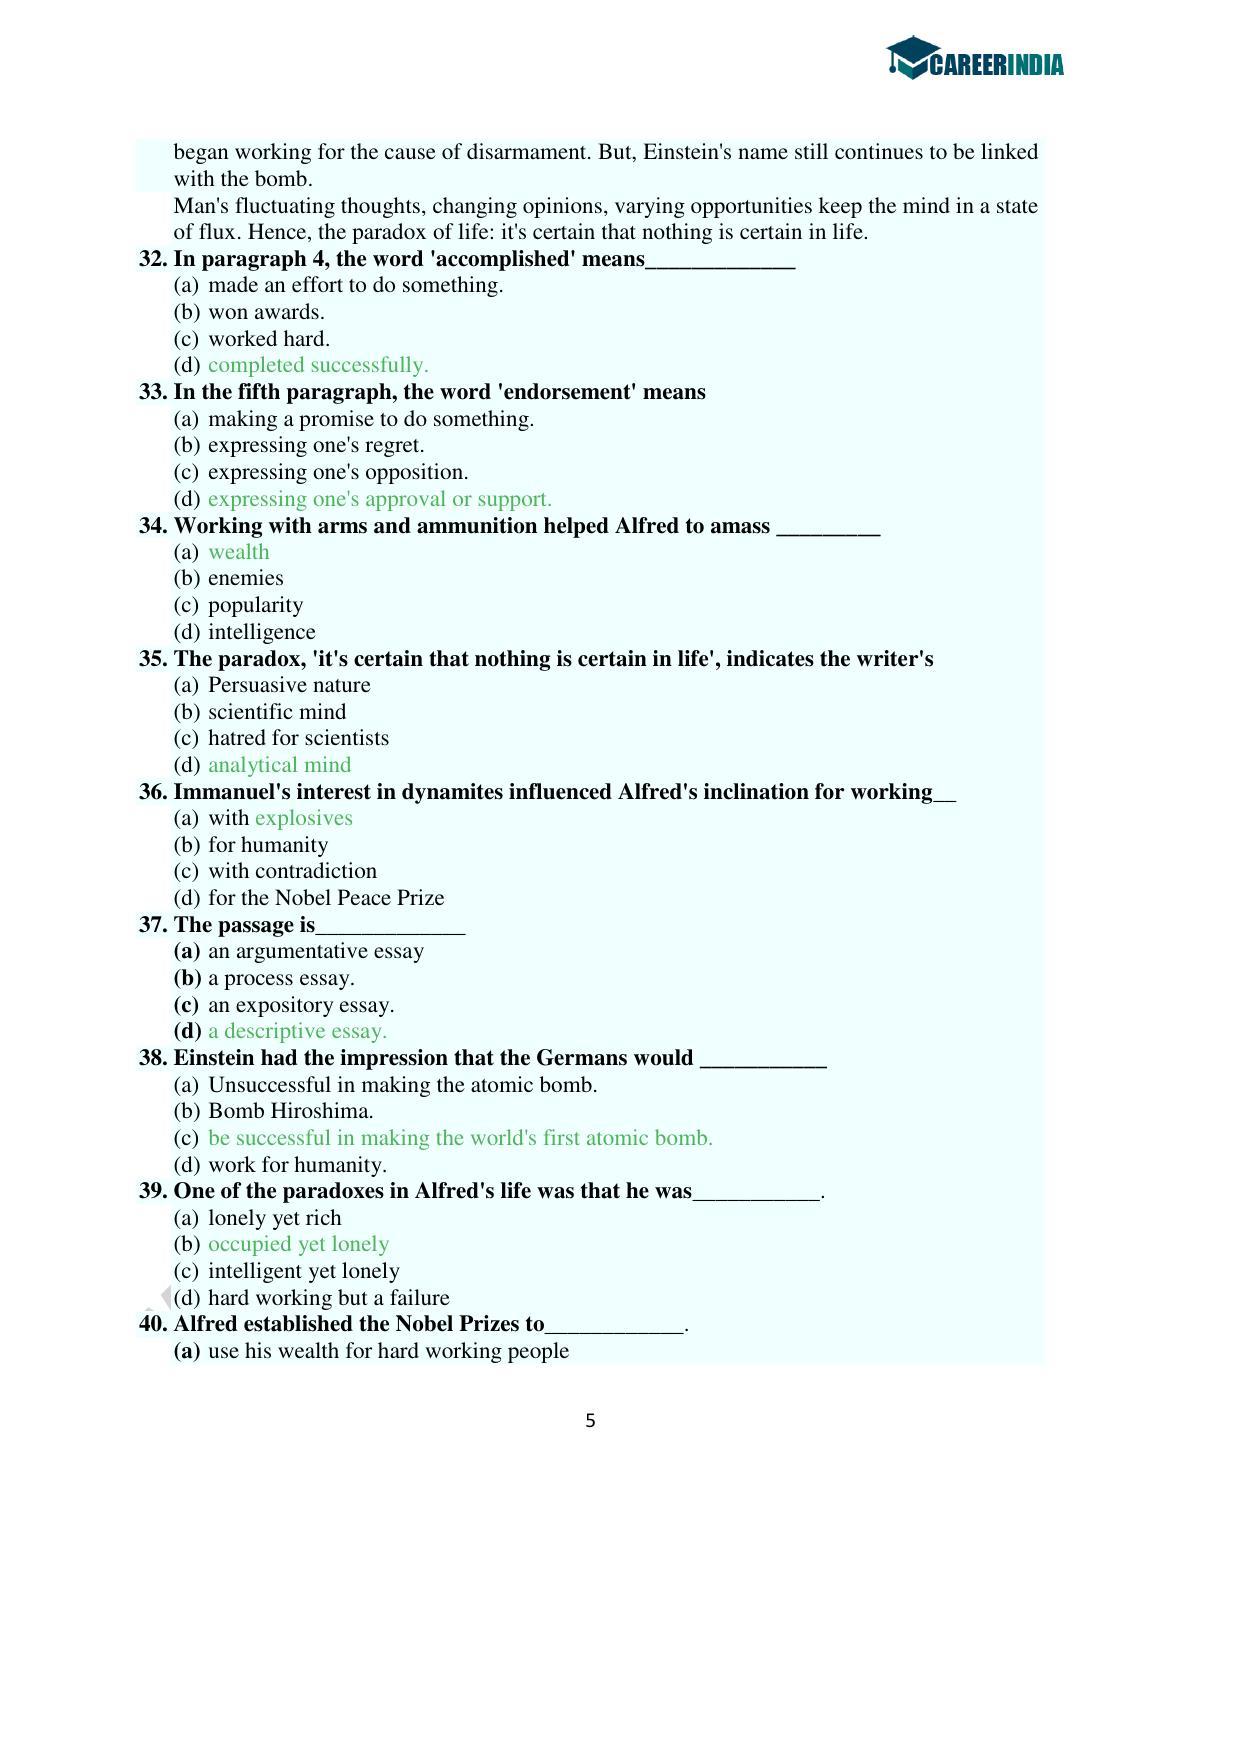 CLAT 2016 UG Question Paper with Answer Key - Page 5